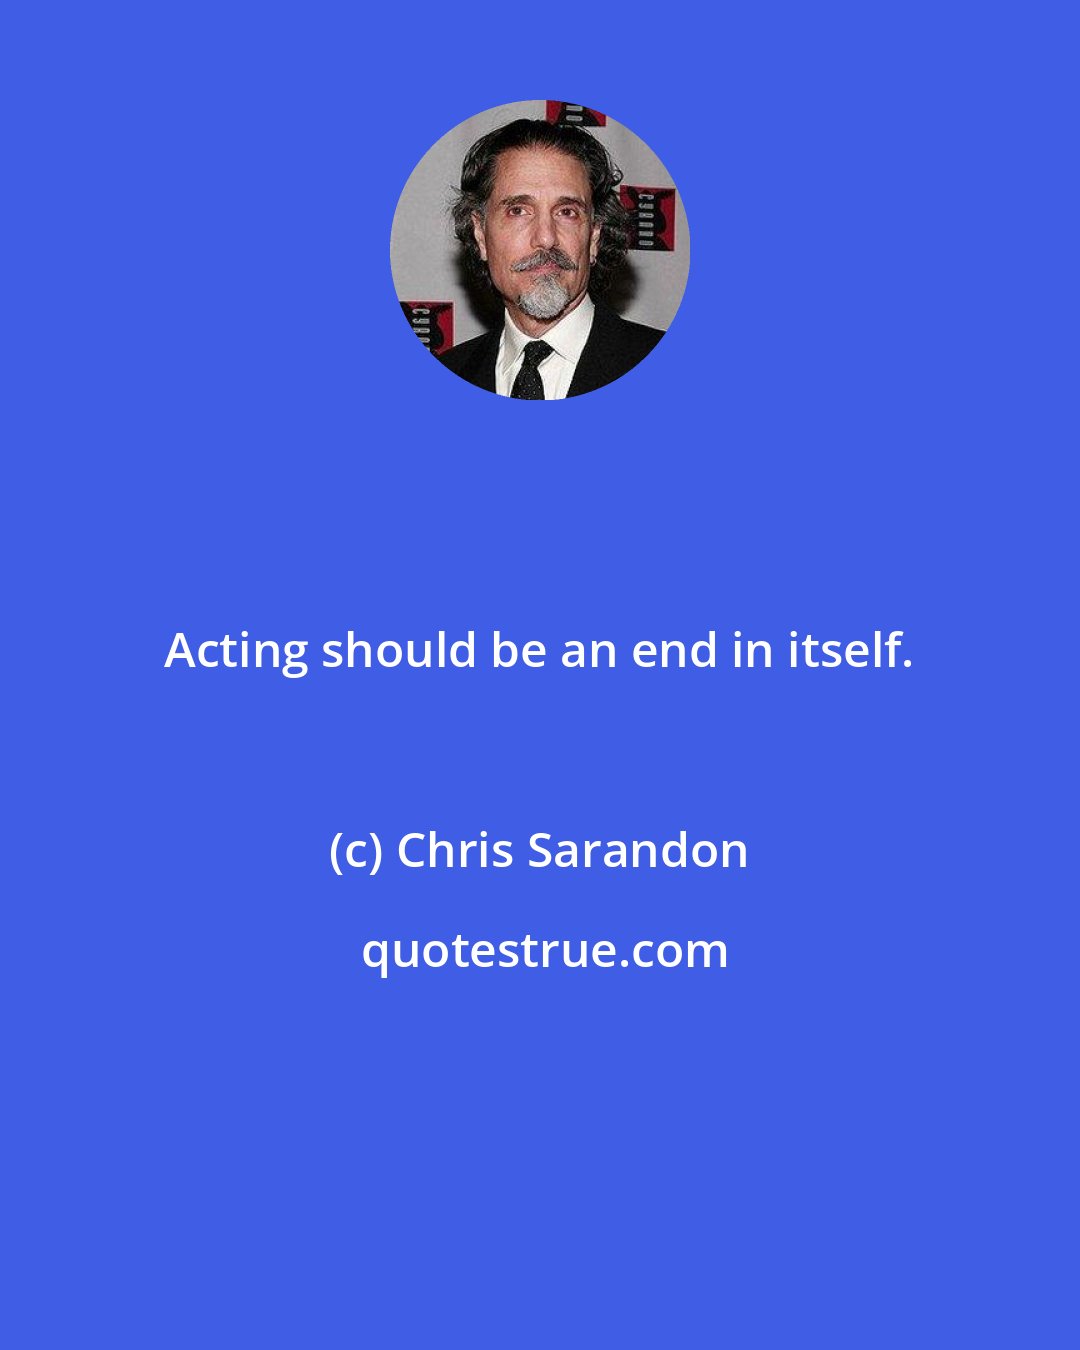 Chris Sarandon: Acting should be an end in itself.